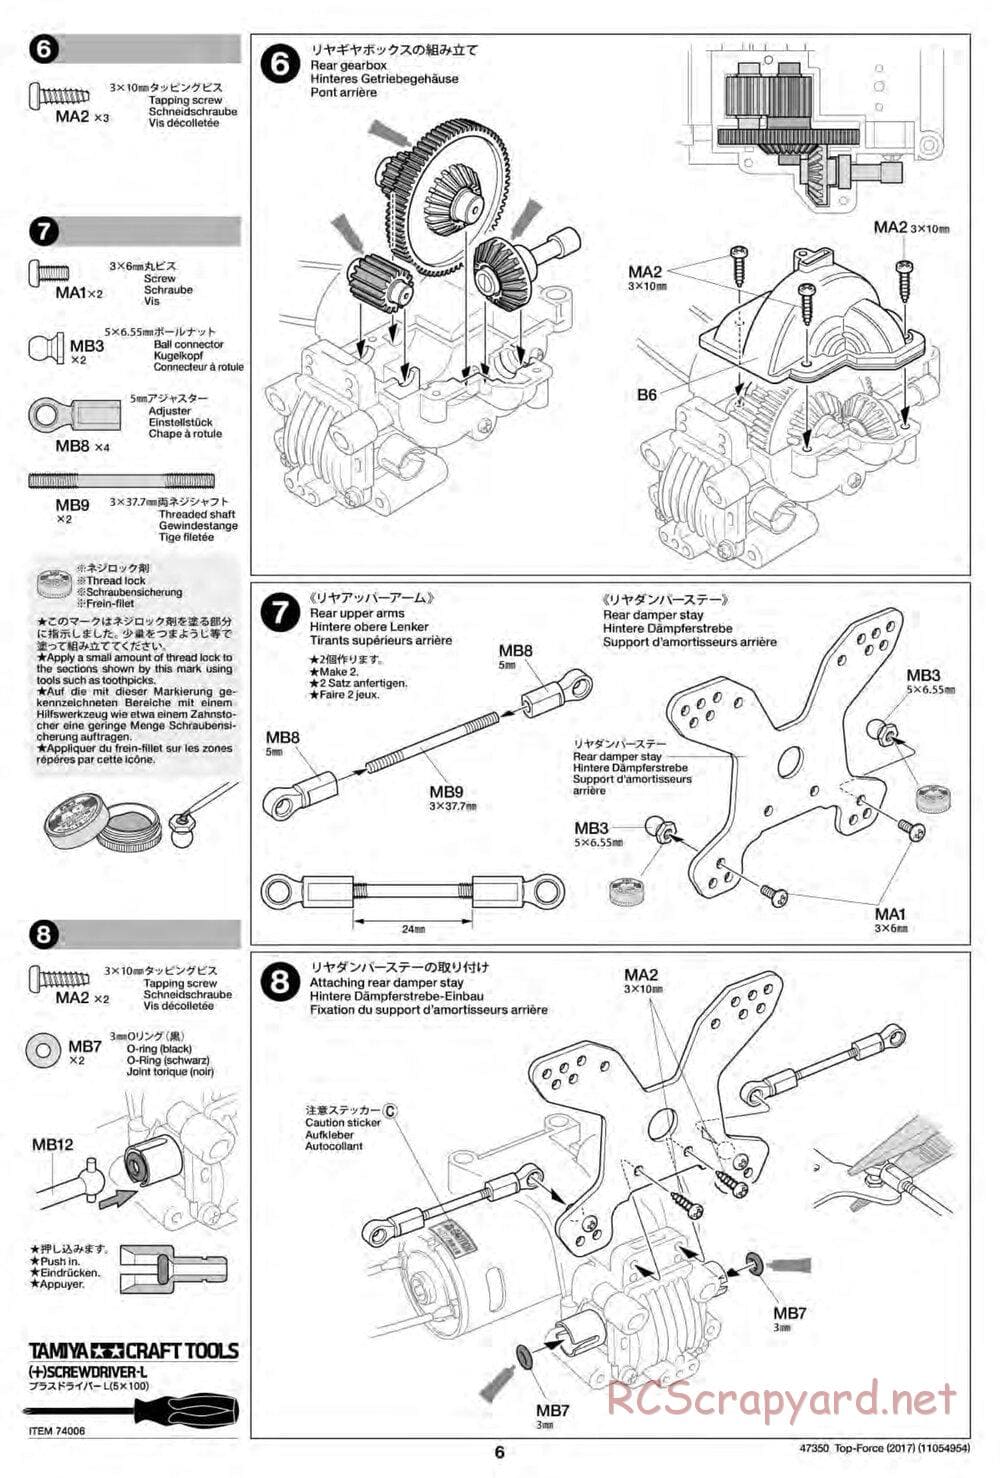 Tamiya - Top Force 2017 - DF-01 Chassis - Manual - Page 6